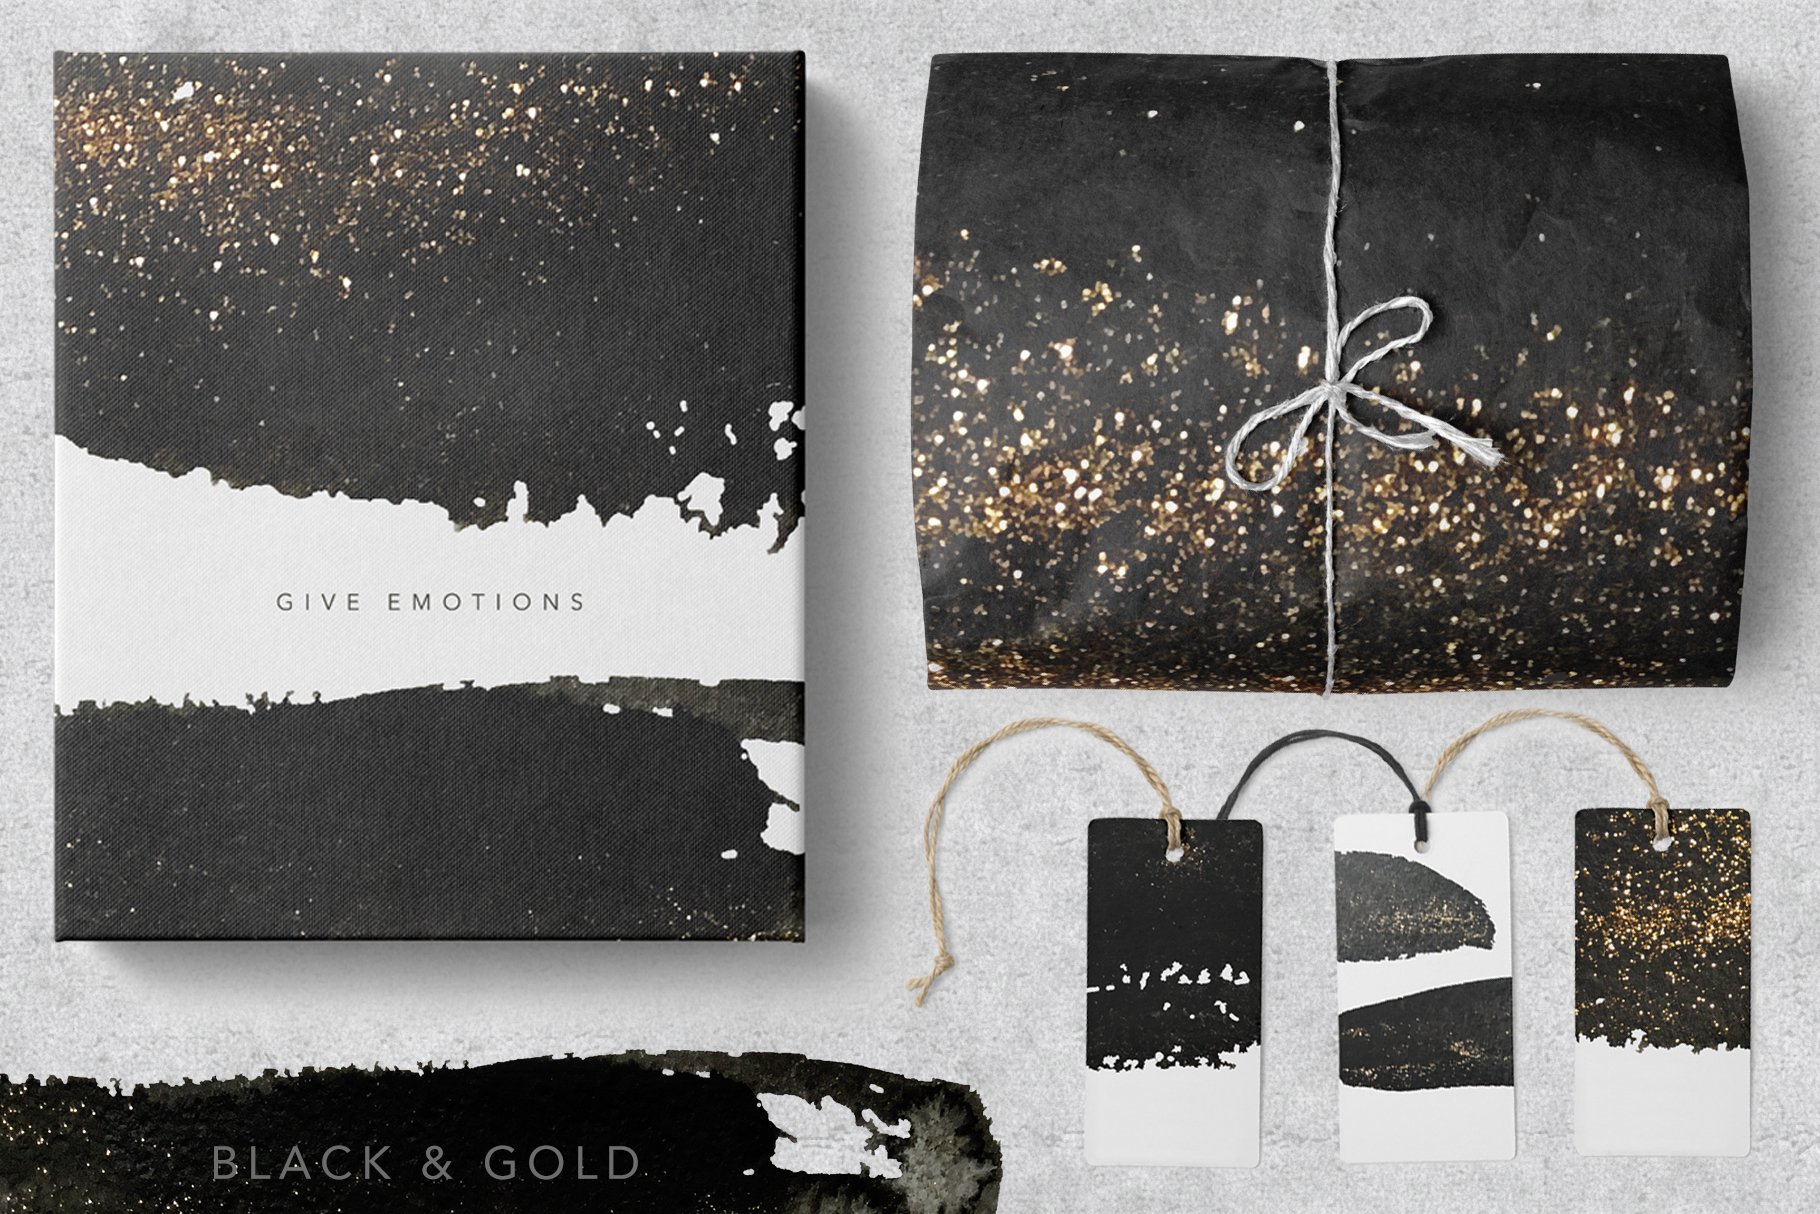 Black & Gold textures preview image.